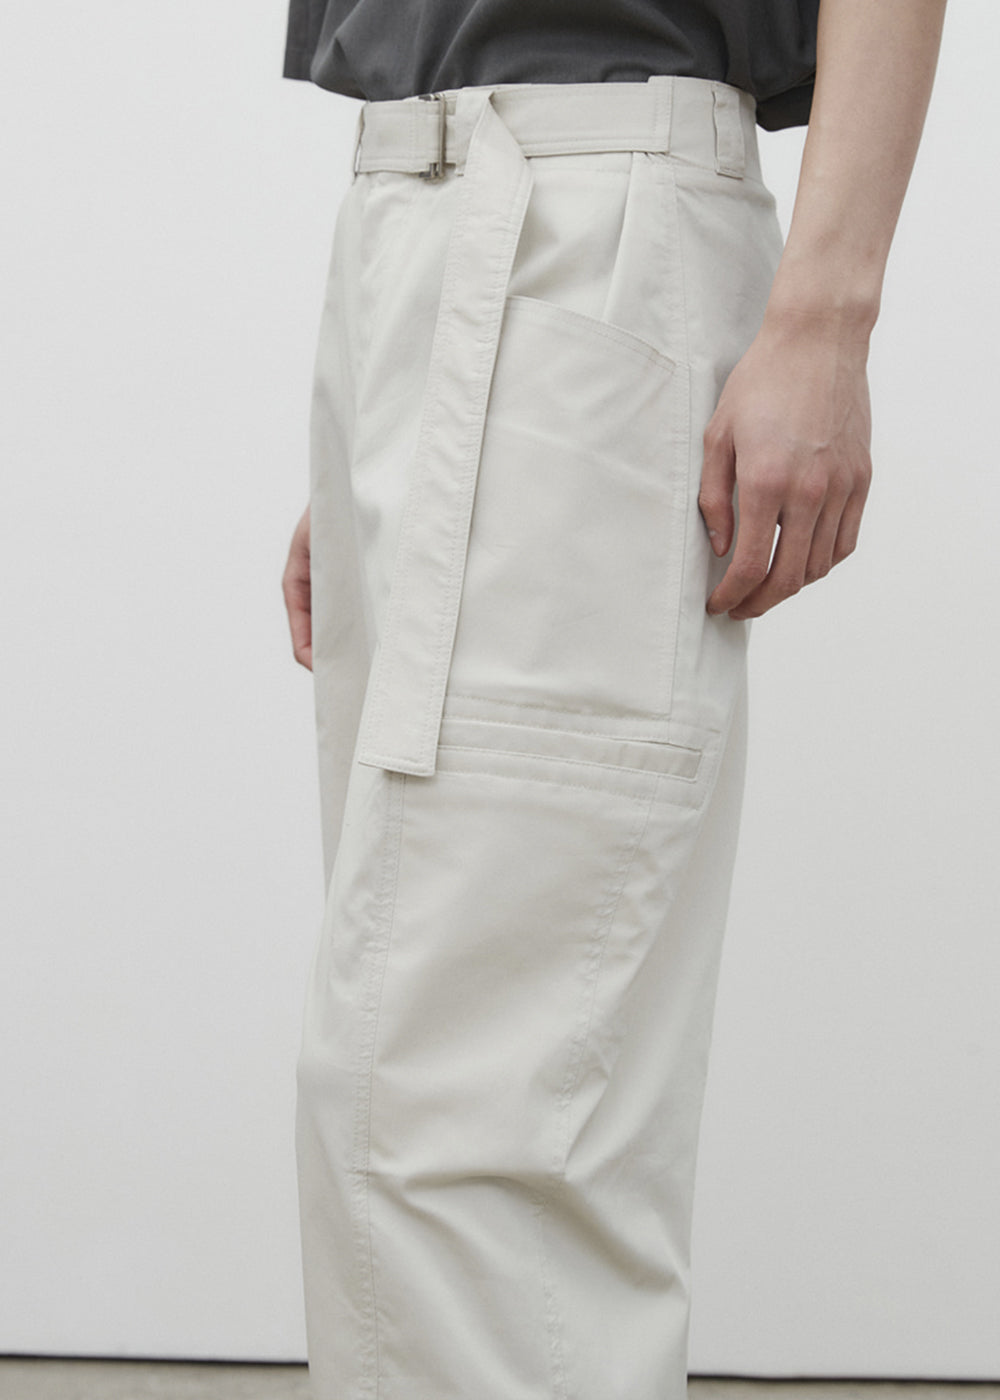 COATING COTTON BELTED PANTS_CREAM